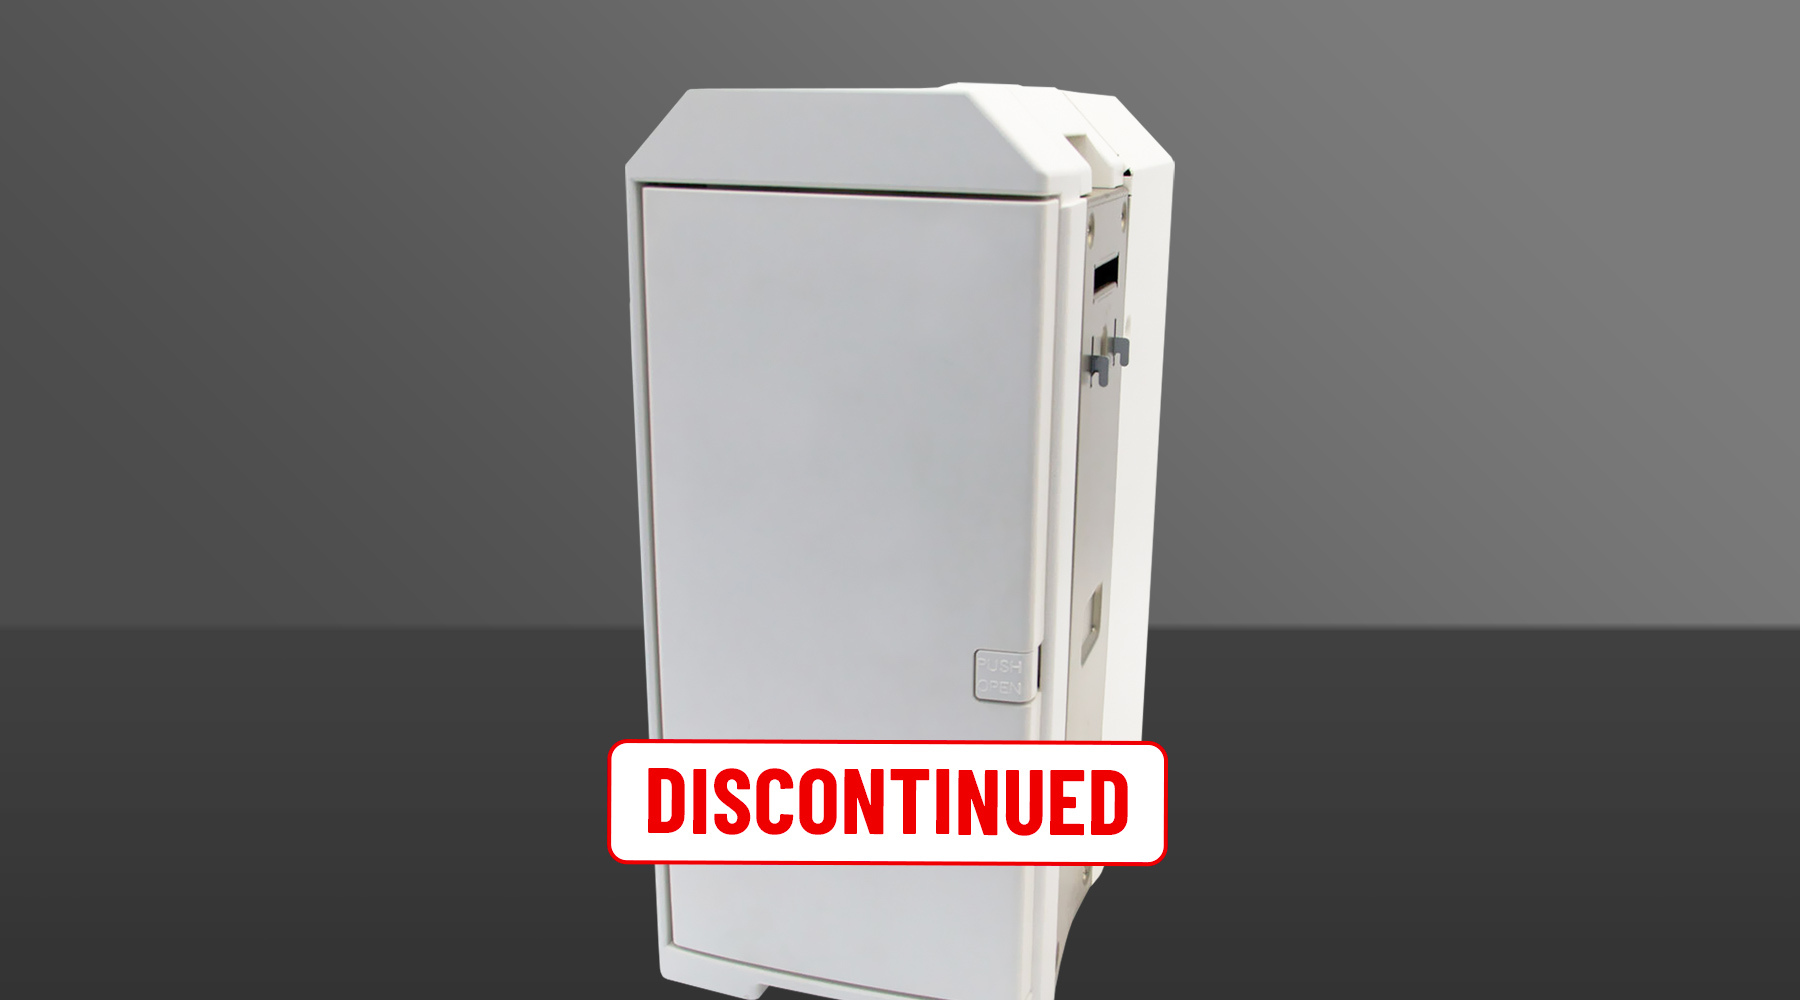 prl151-discontinued